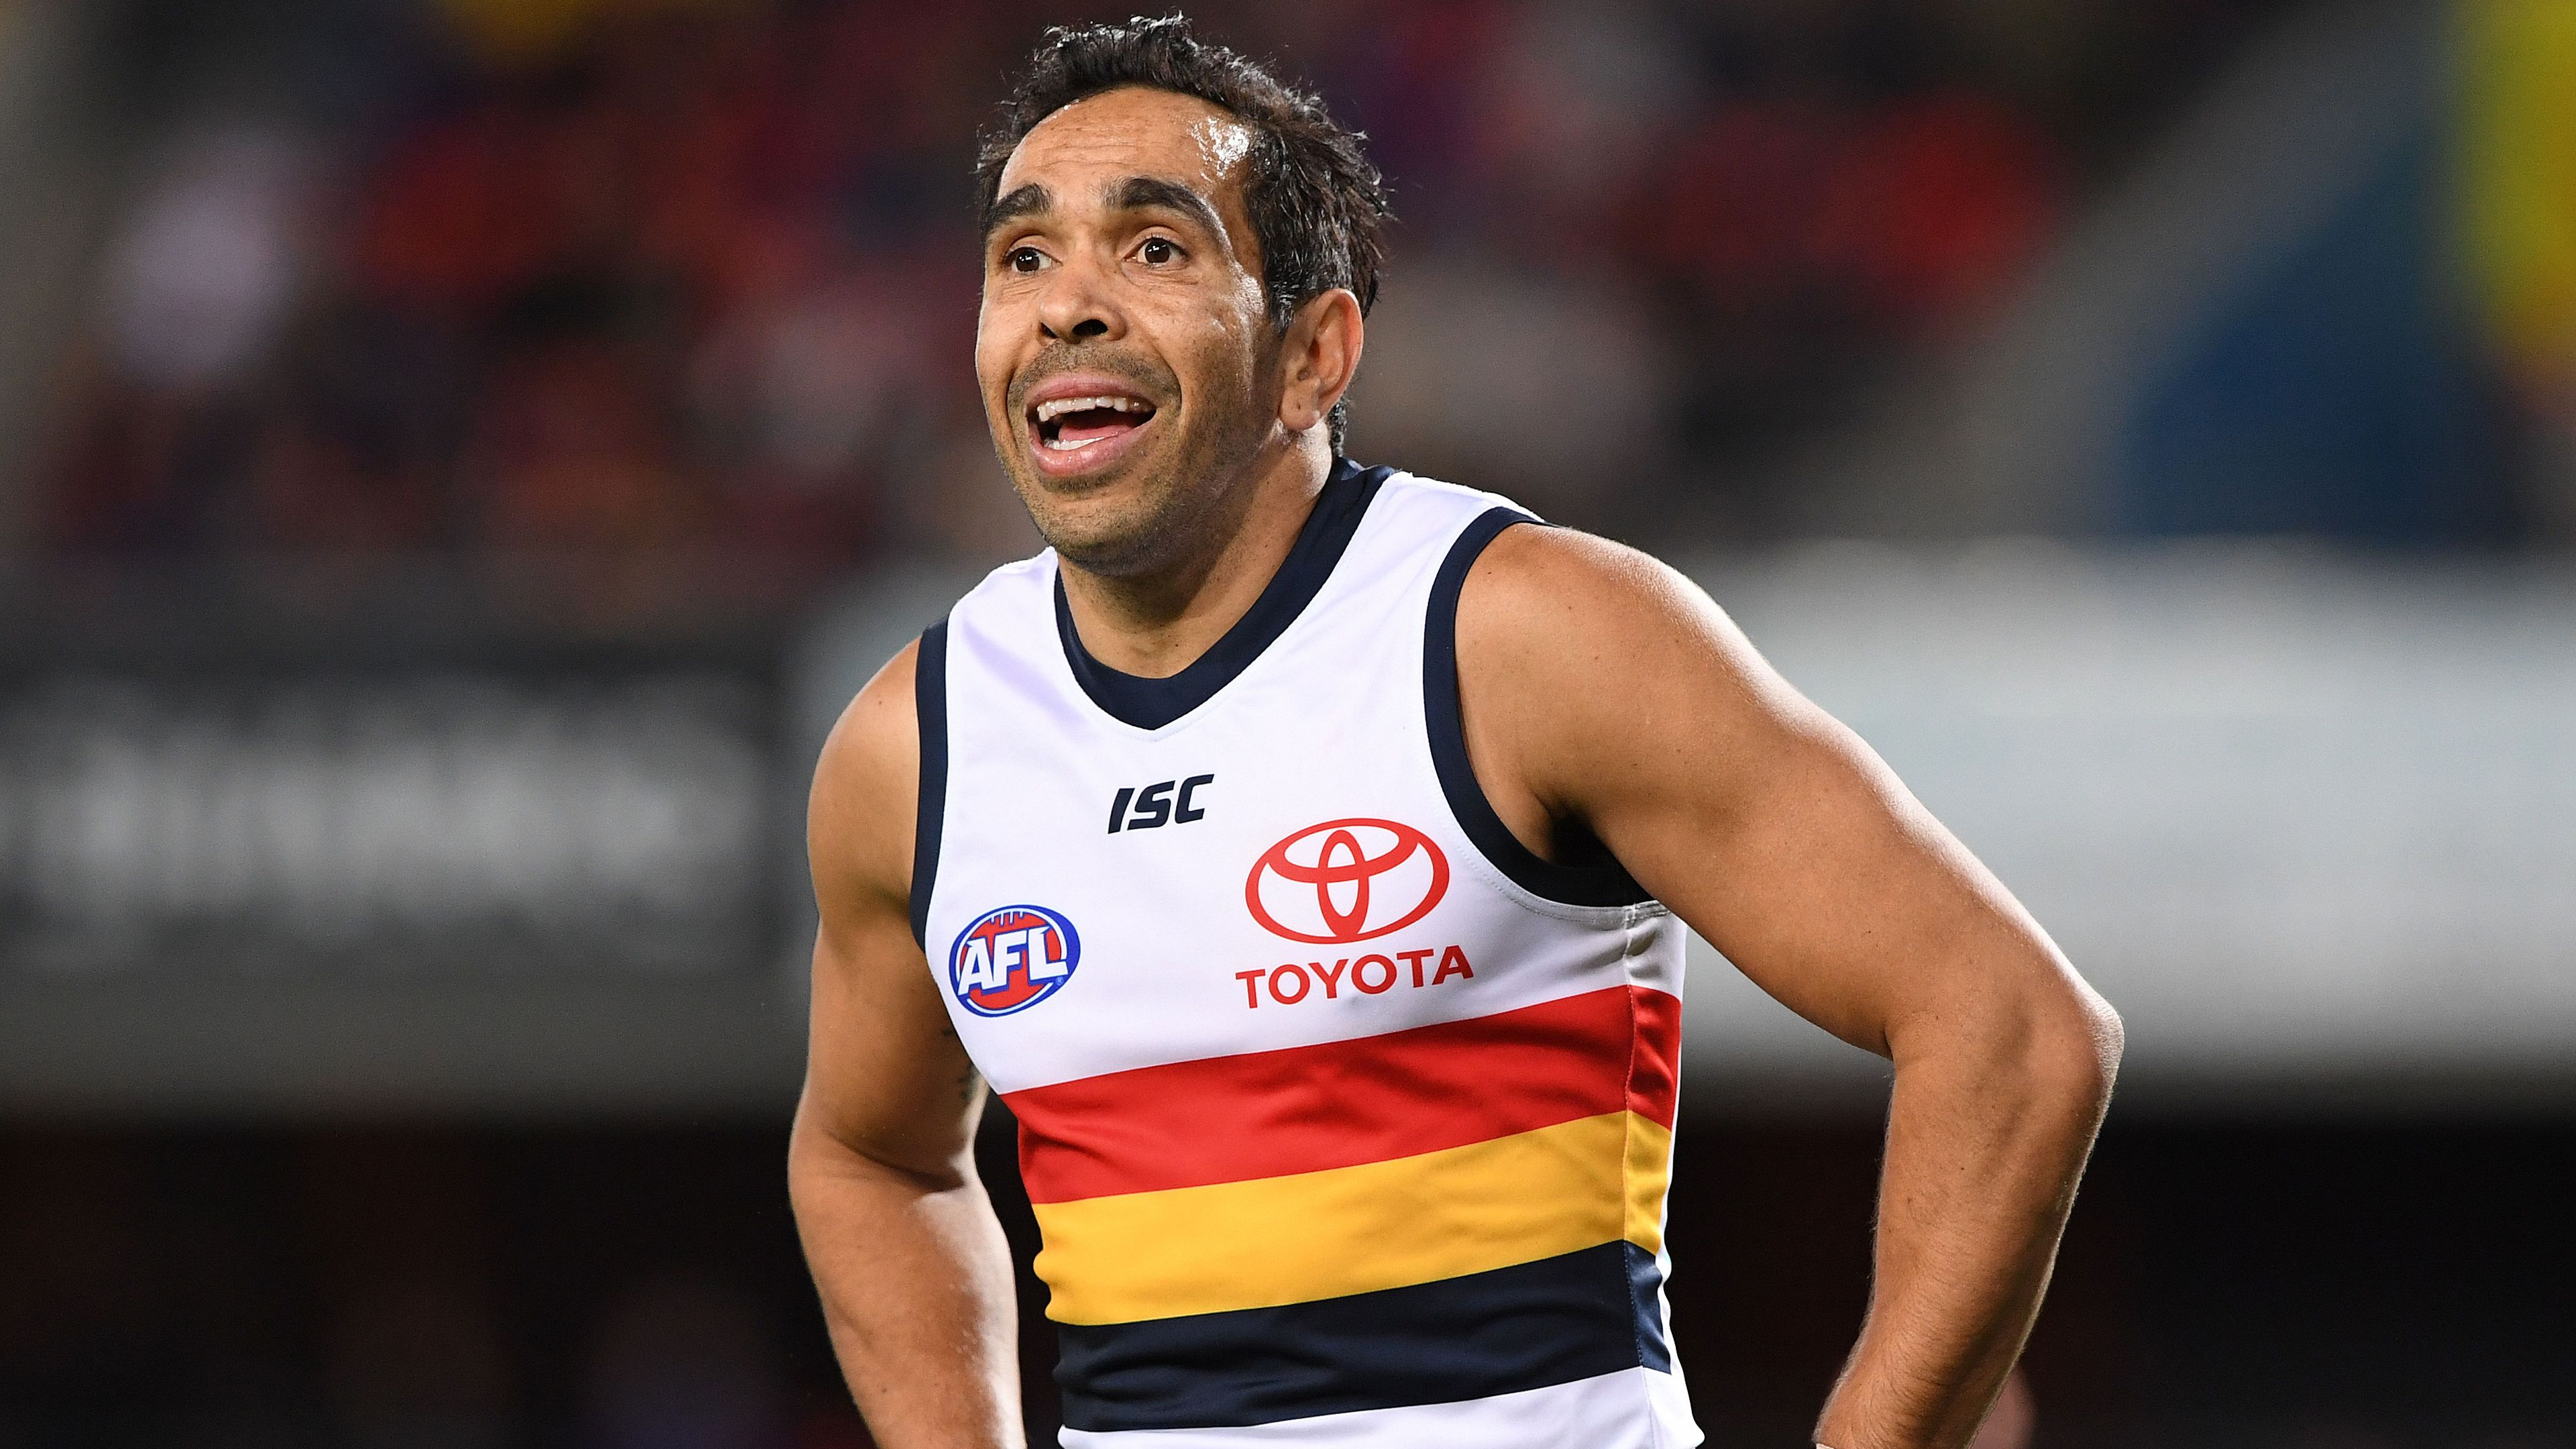 Eddie Betts not on AFL trade table: Adelaide Crows chief